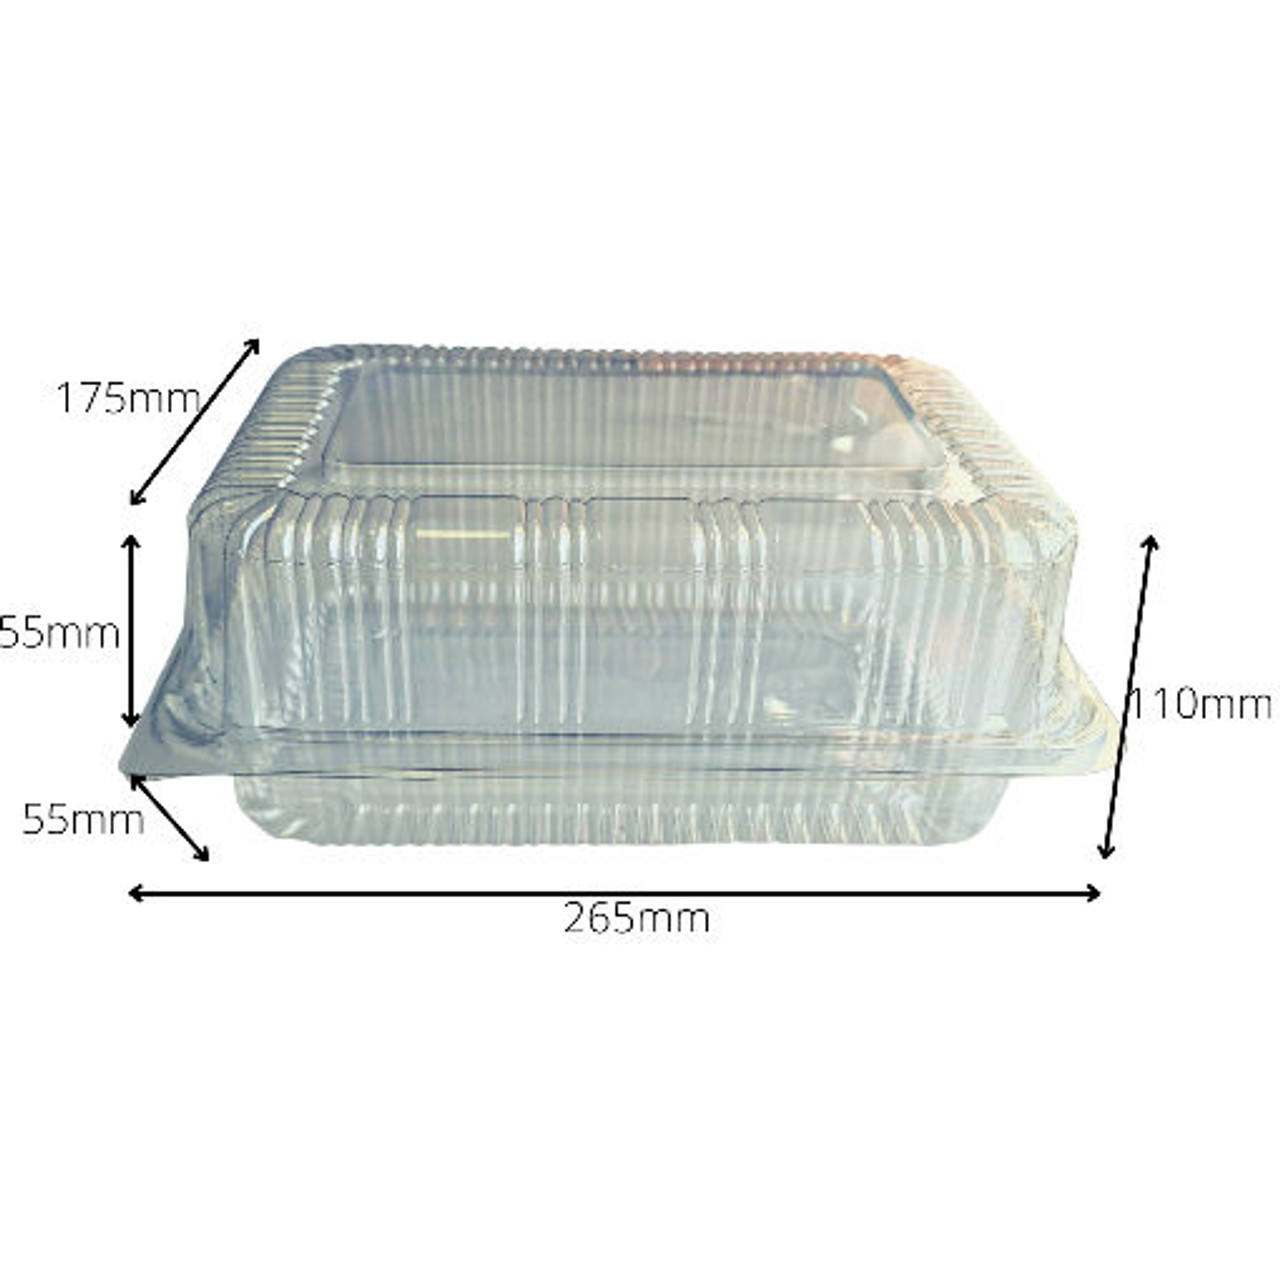 Pack 90 - Quality Extra Large Crystal Clear Hinged Bakery Containers 265 x 175 x 110mm